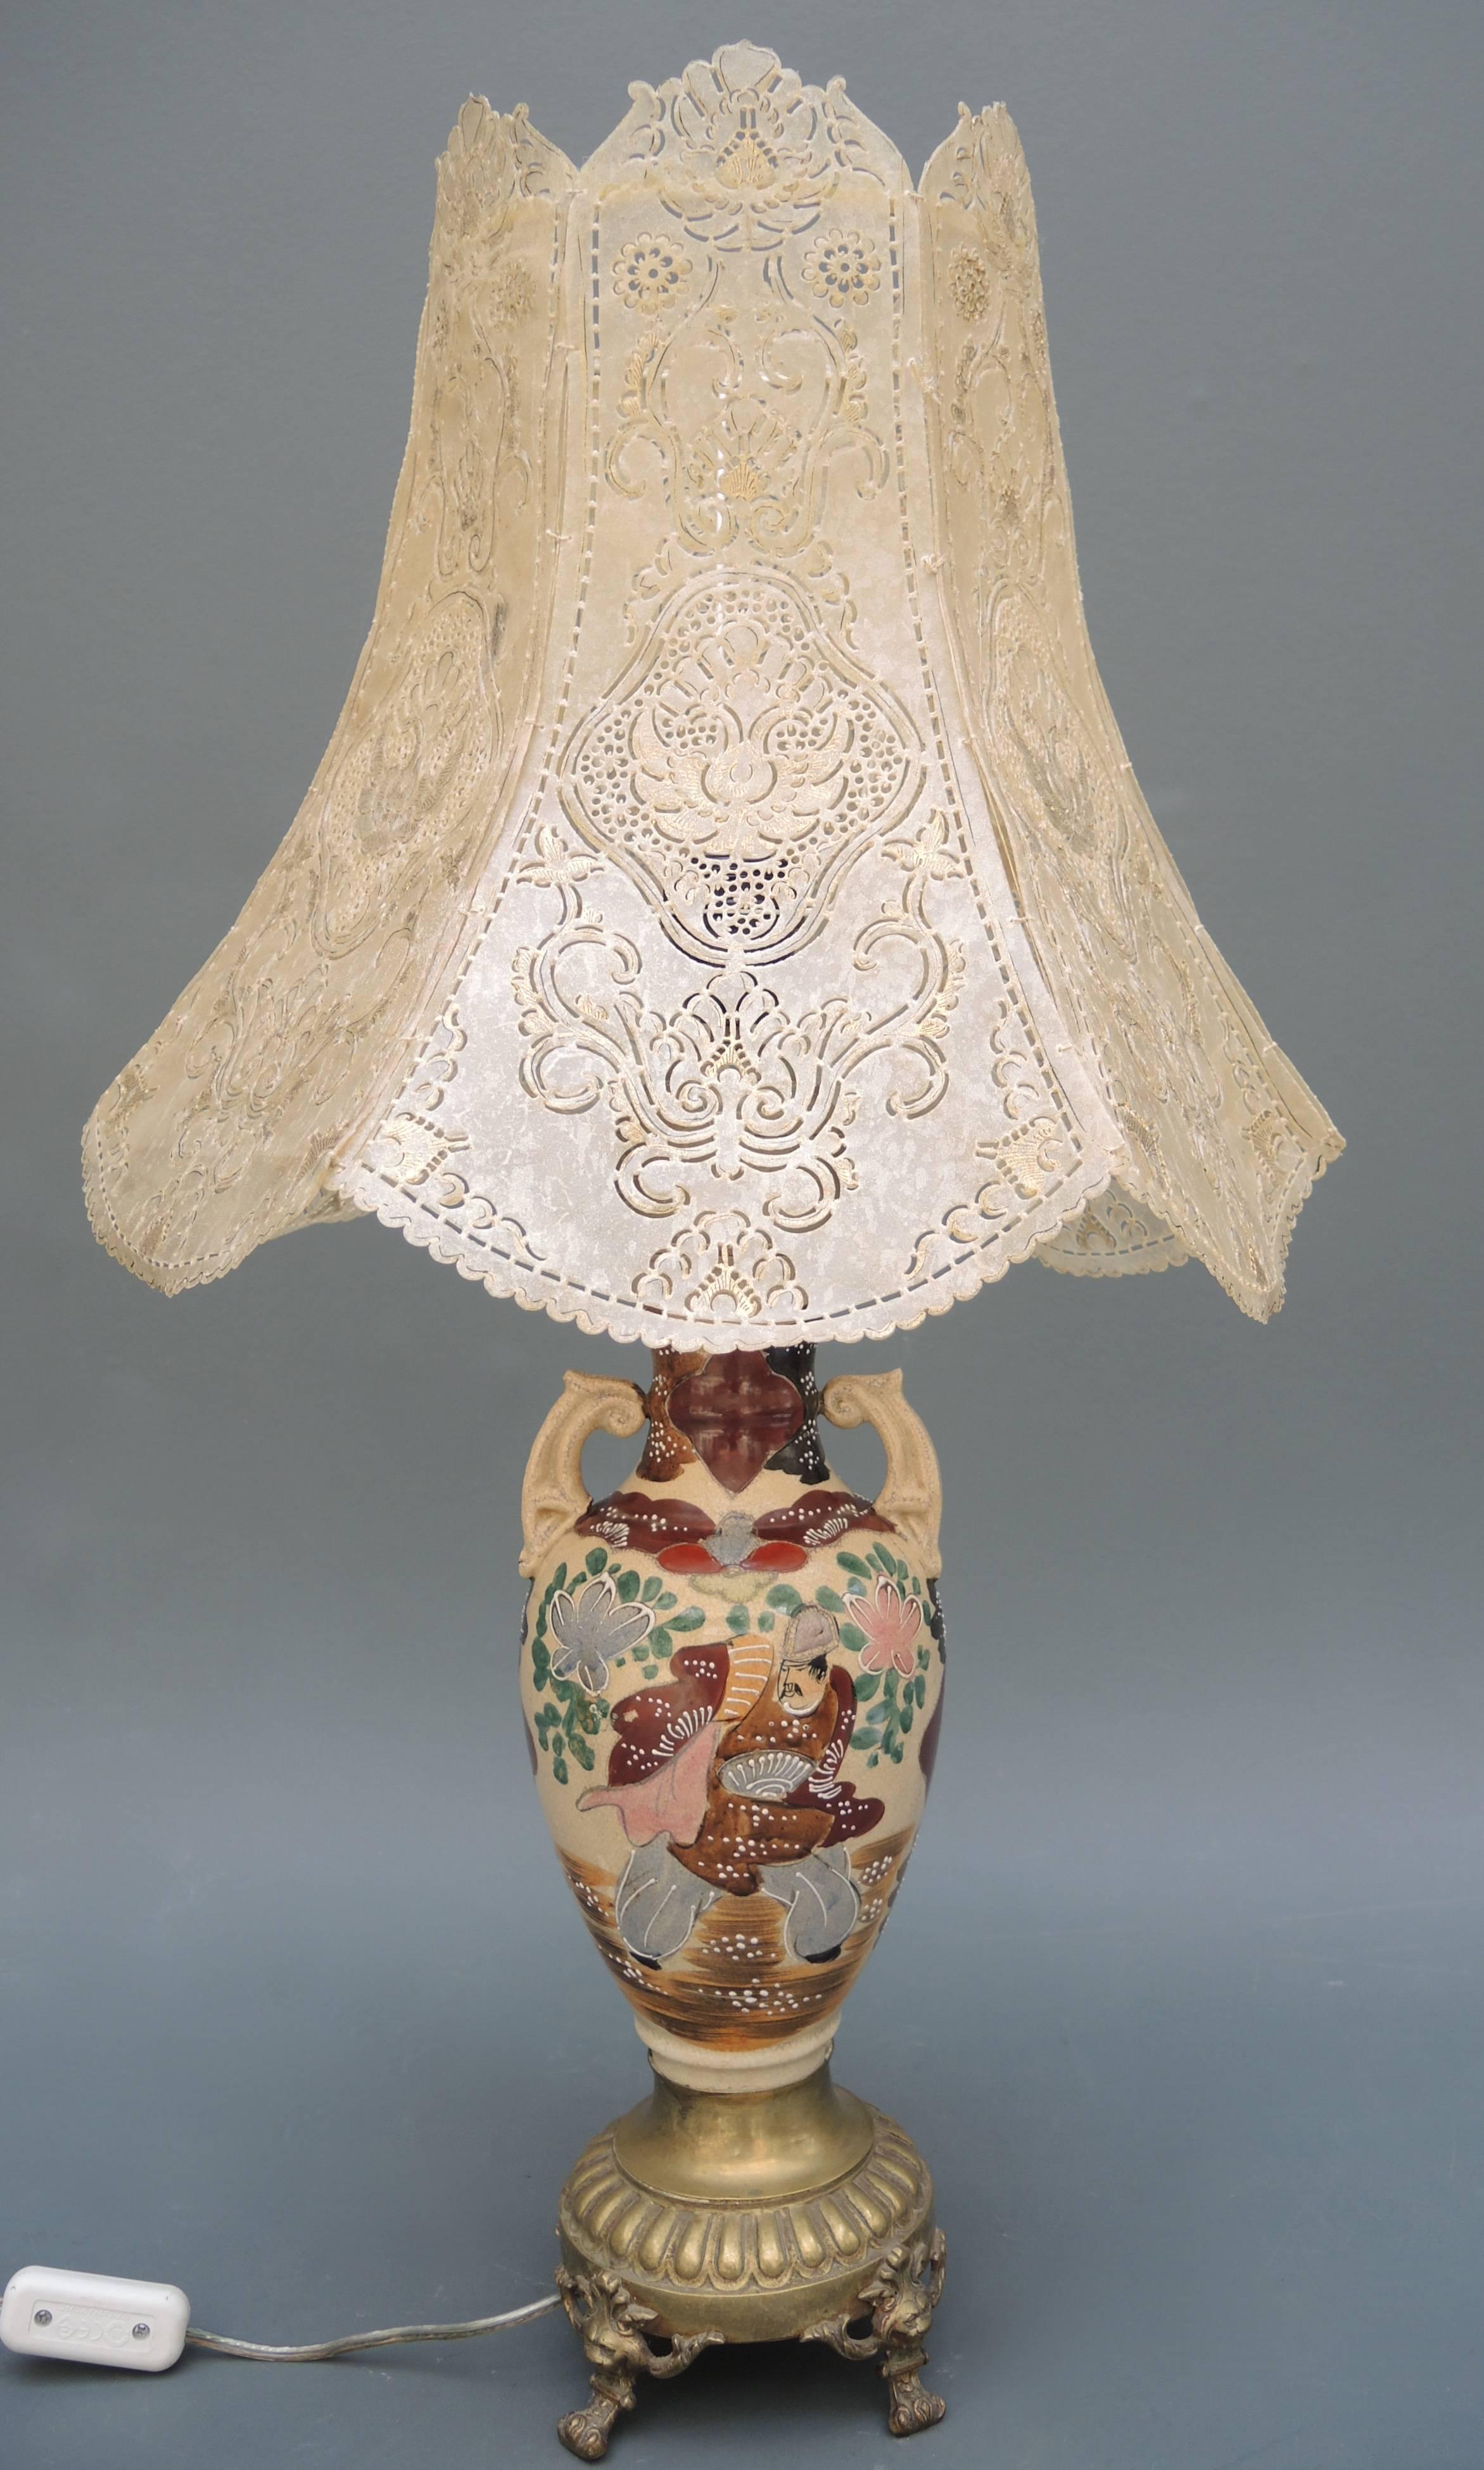 An elegant Japanese porcelain vase topped with the original vellum (calf skin) stencil cut lamp shade, circa 1930.
Newly wired and ready to use.